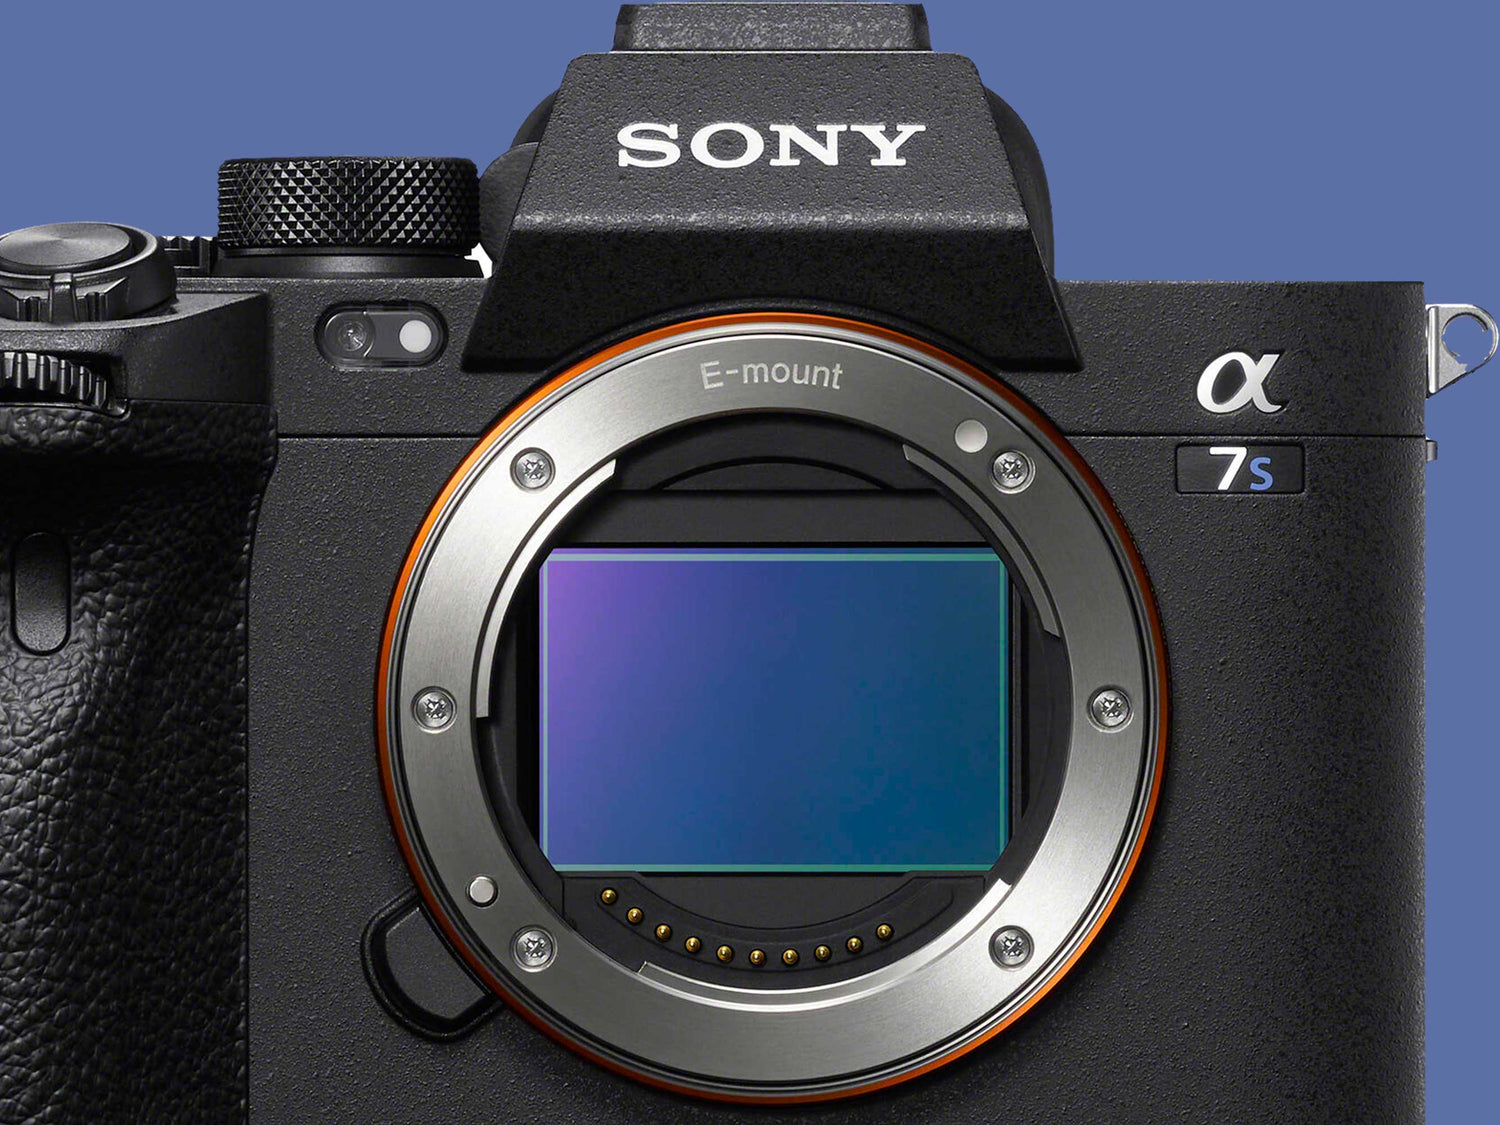 Sony a7S III Features 4K/120p Recording and 15+ Stop Dynamic Range